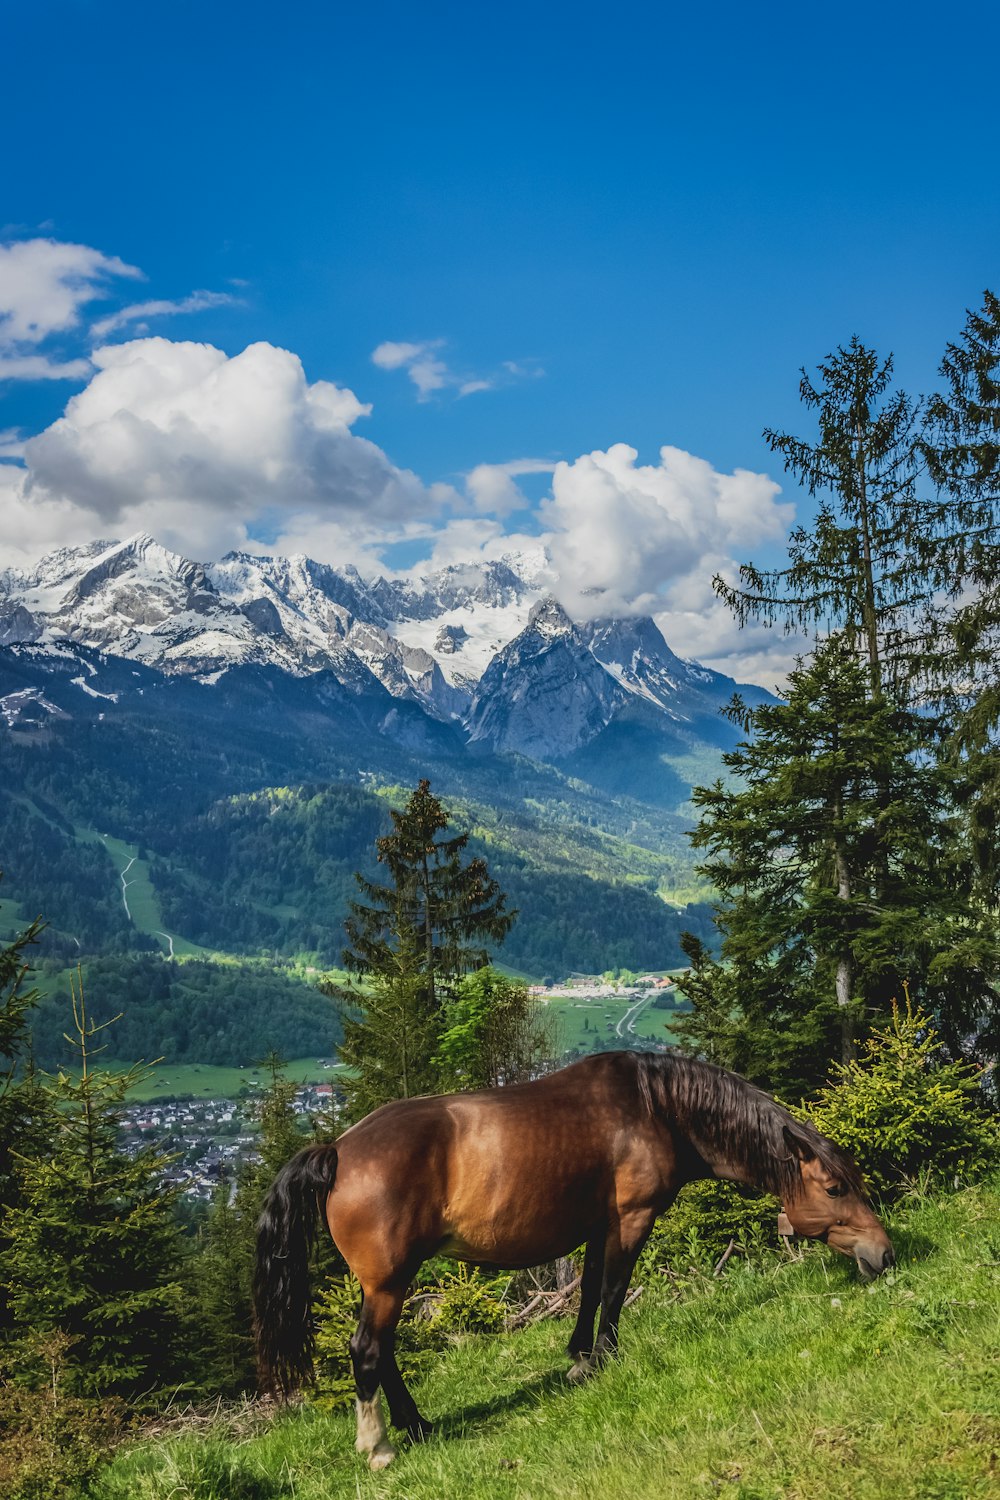 brown horse on green grass field near green trees and snow covered mountains during daytime